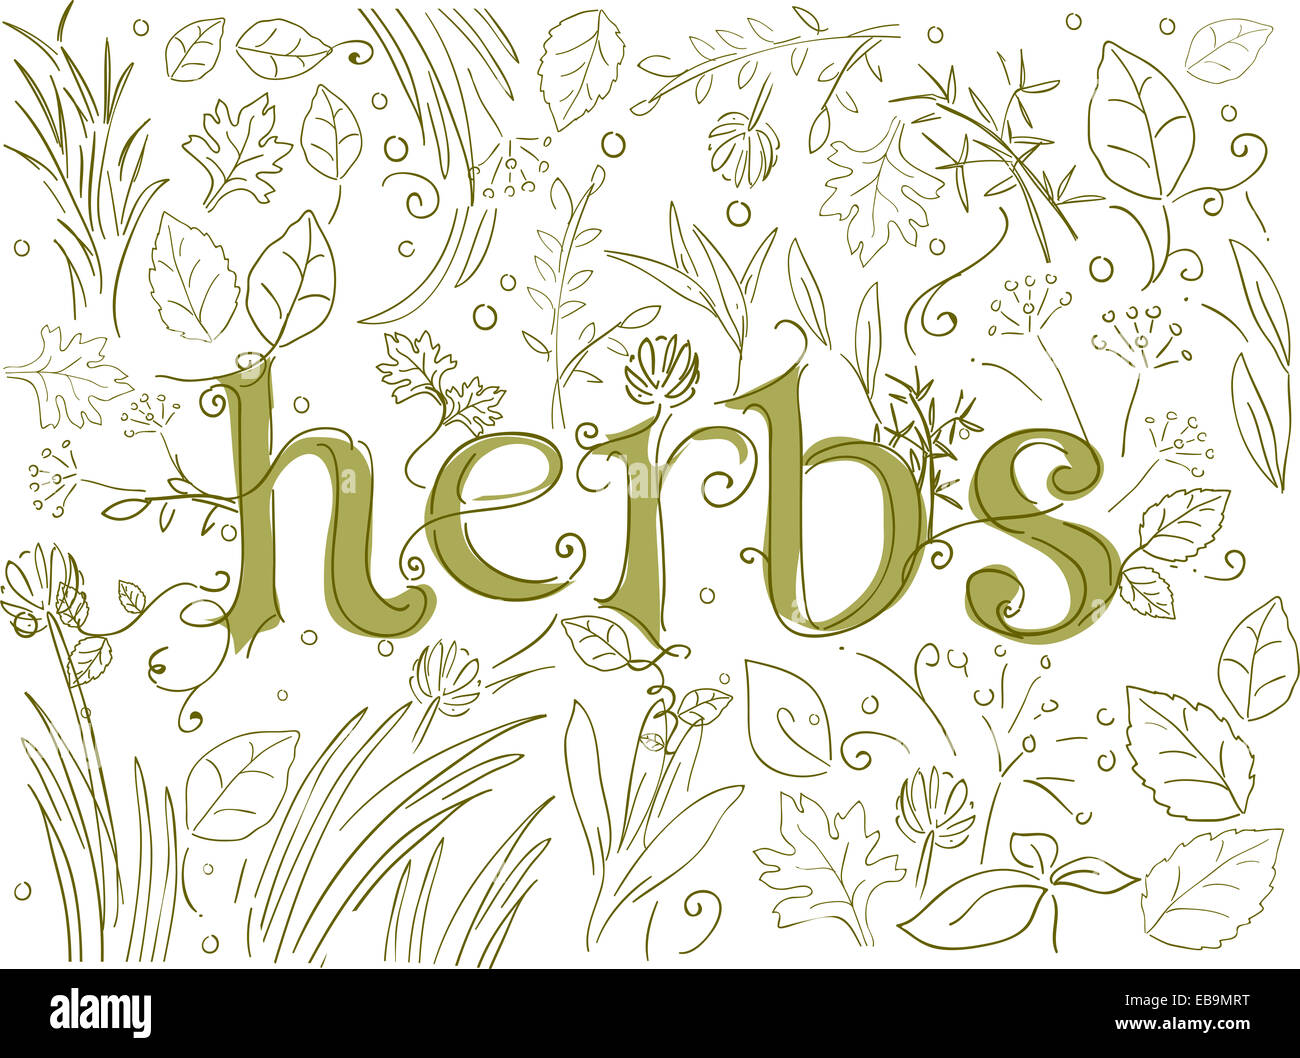 Doodle Illustration Featuring Different Herbs Stock Photo